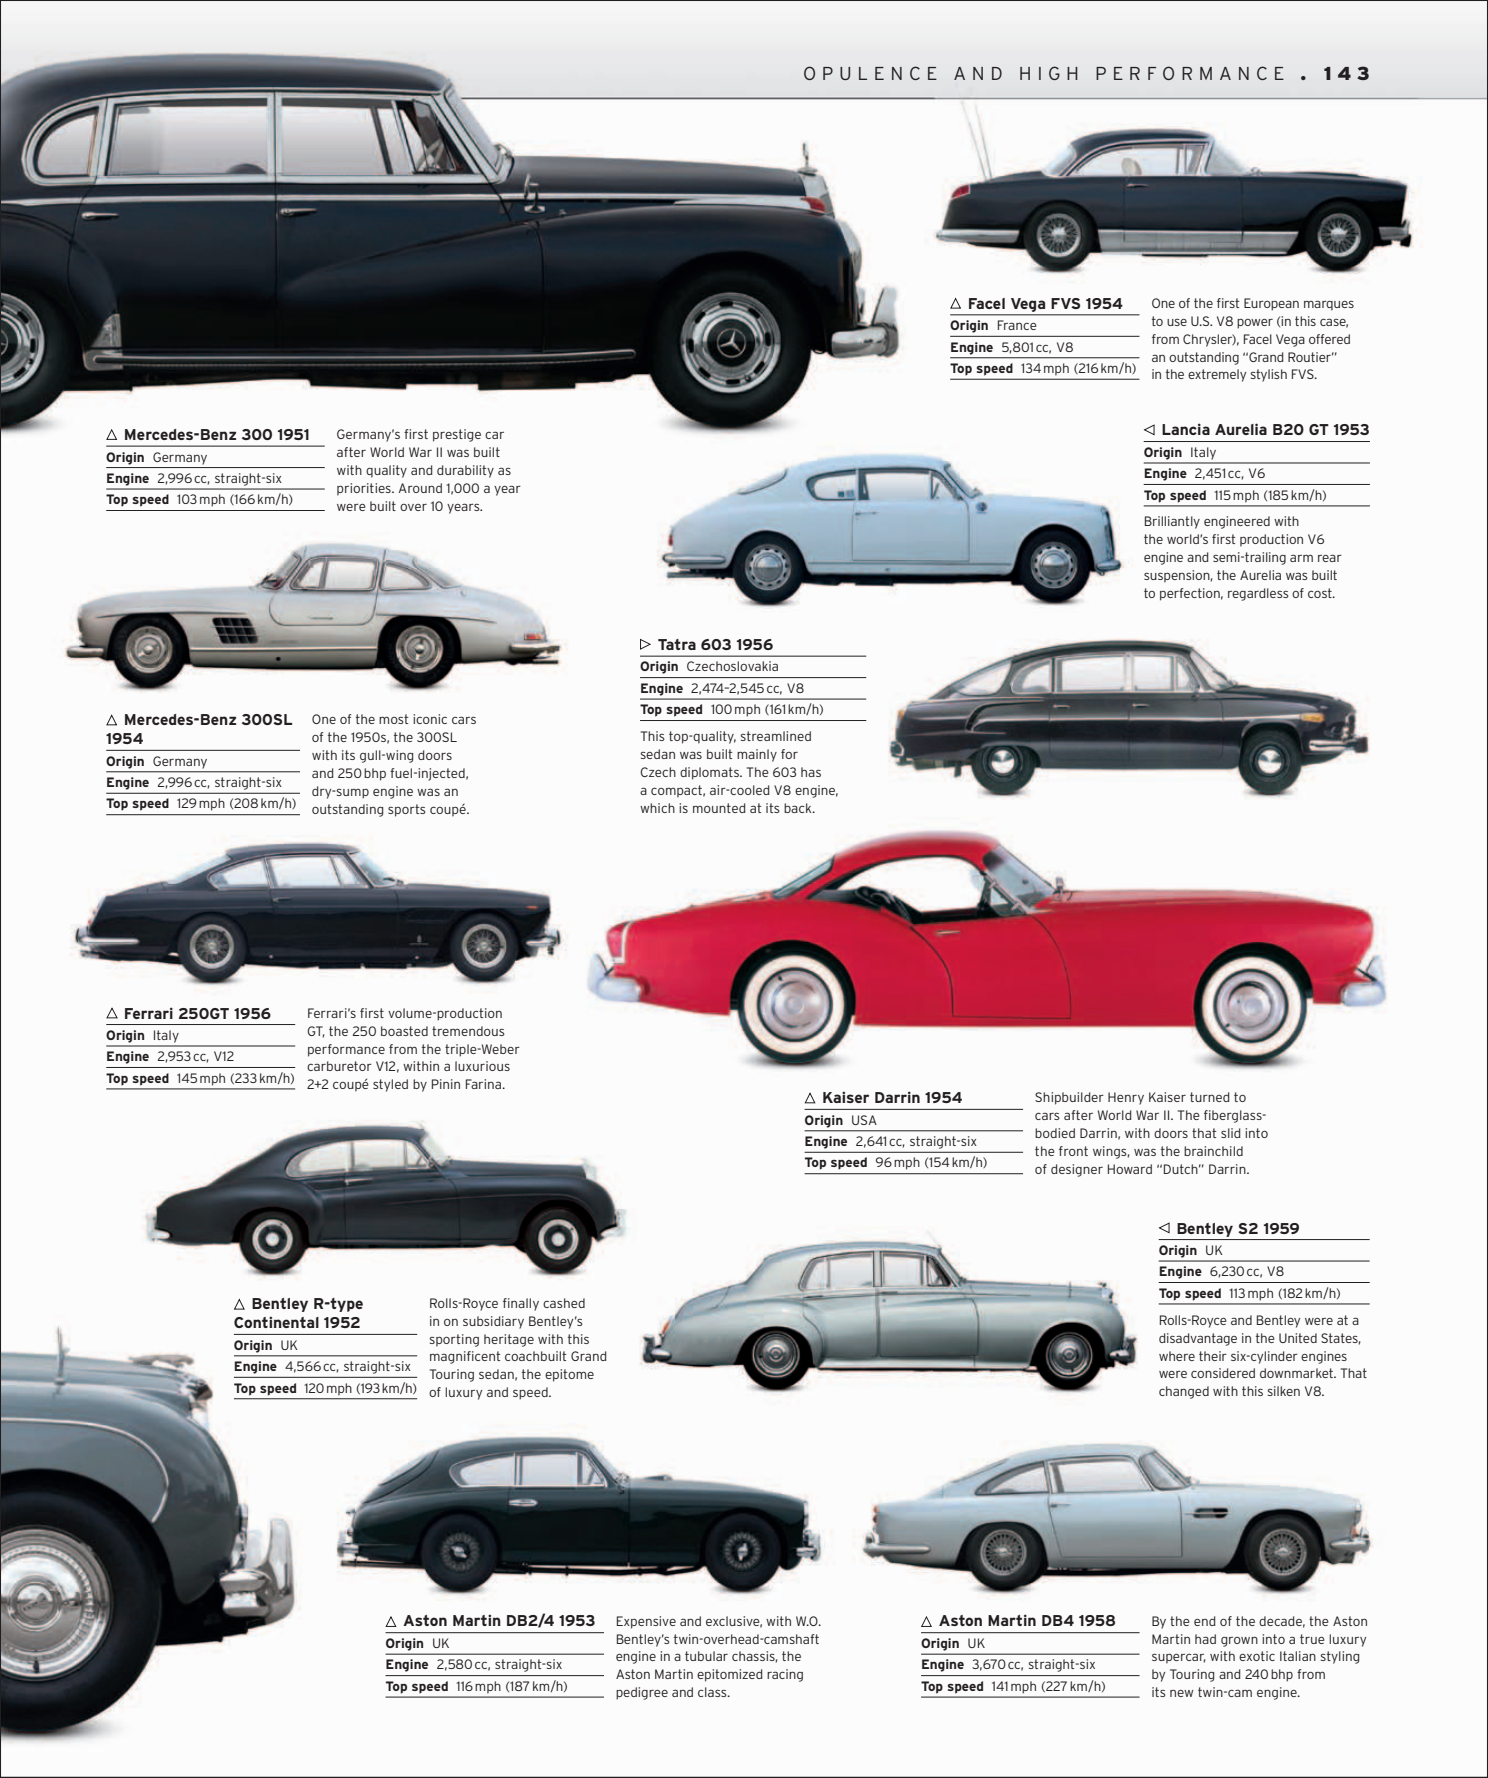 Car%20-%20The%20Definitive%20Visual%20History%20of%20the%20Automobile_145.png